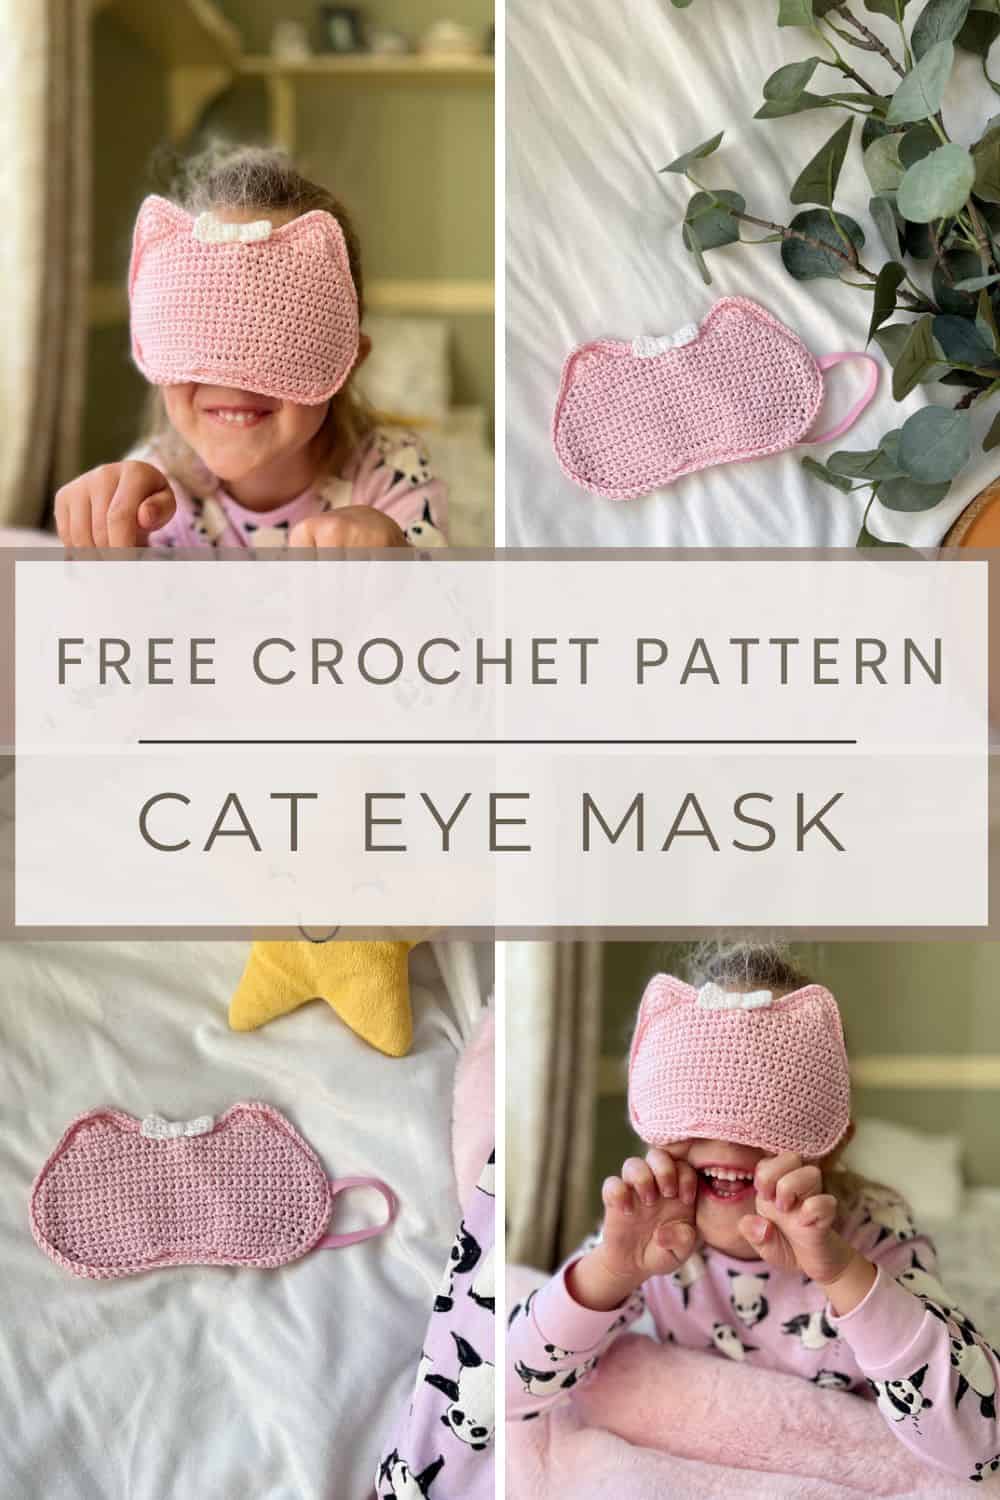 Crochet cat eye mask images being worn by a little girl in pink pajamas.